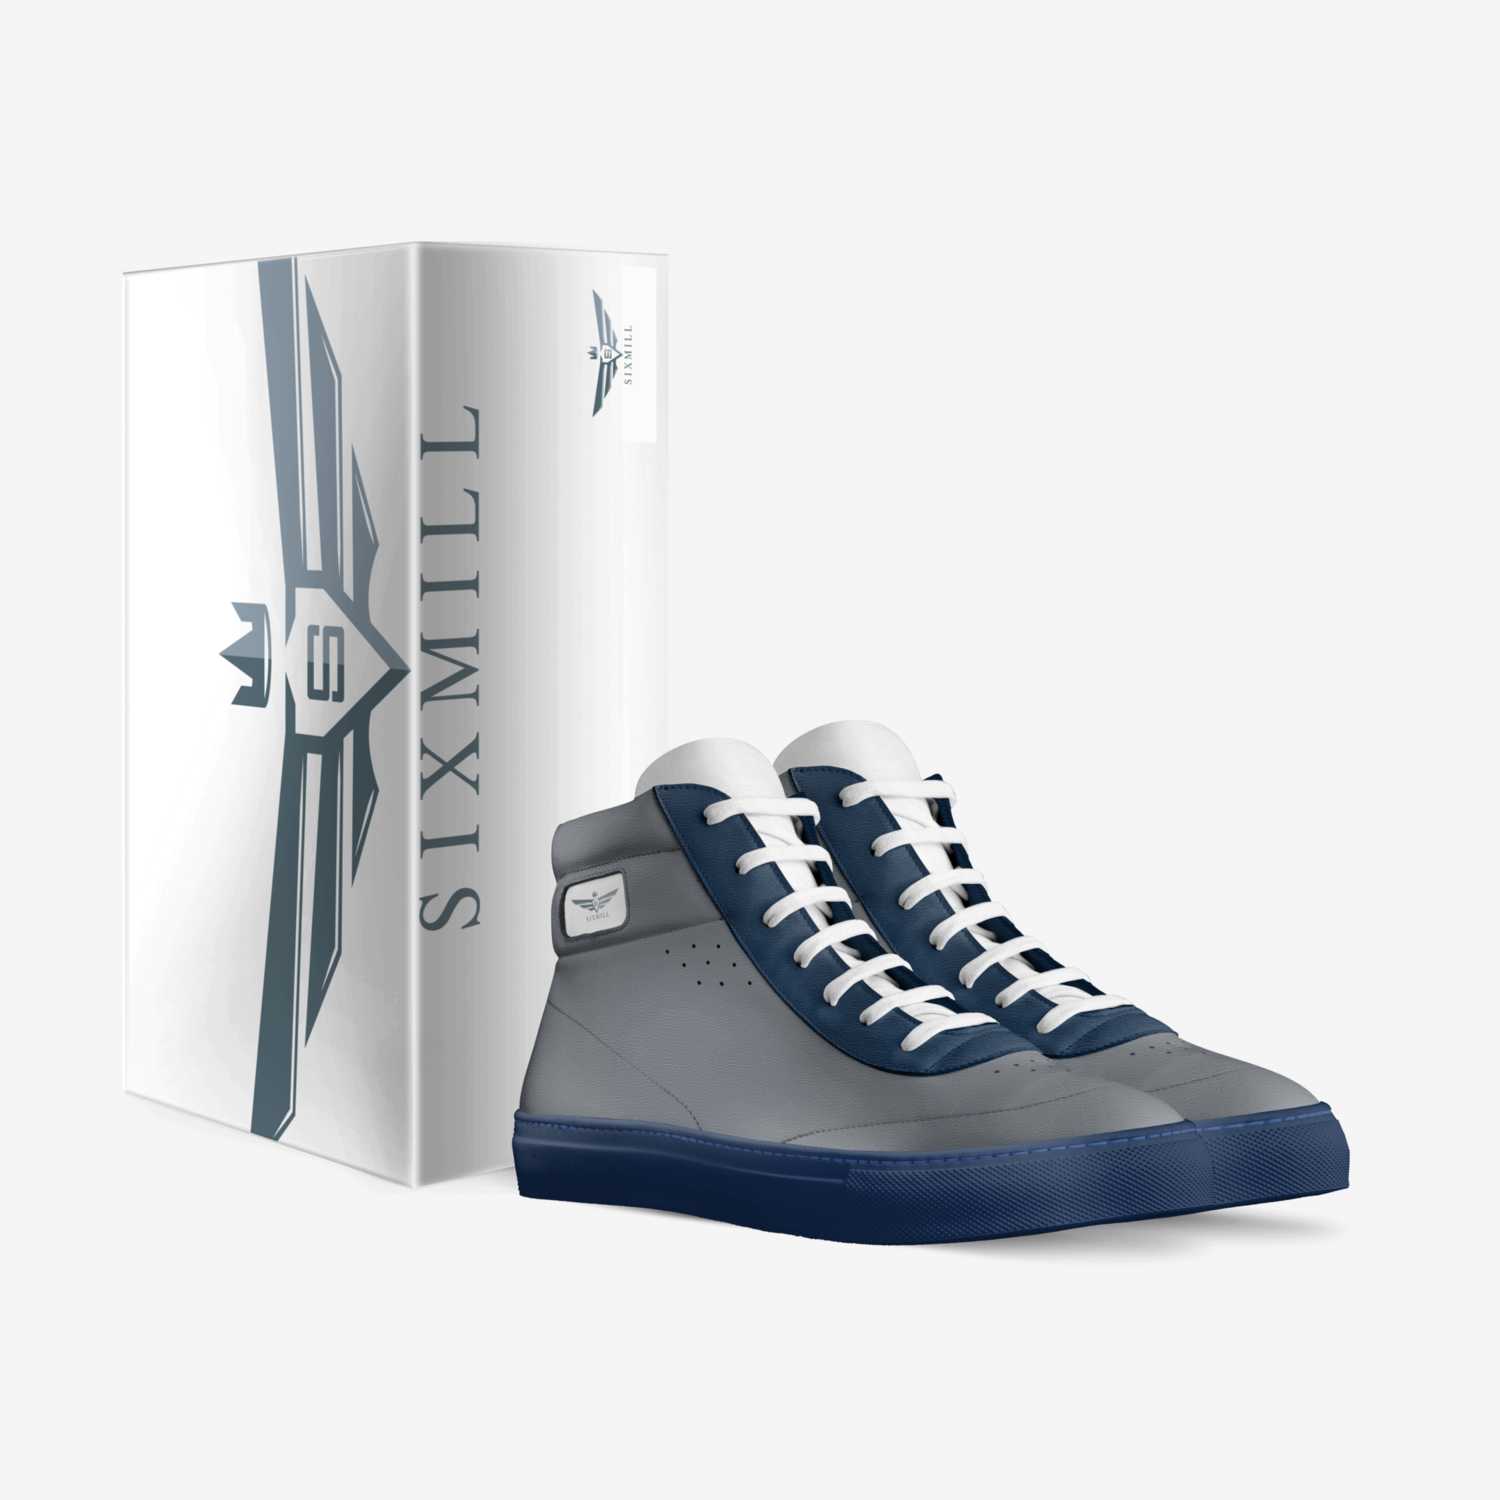 Sixmill custom made in Italy shoes by Jeff Similien | Box view